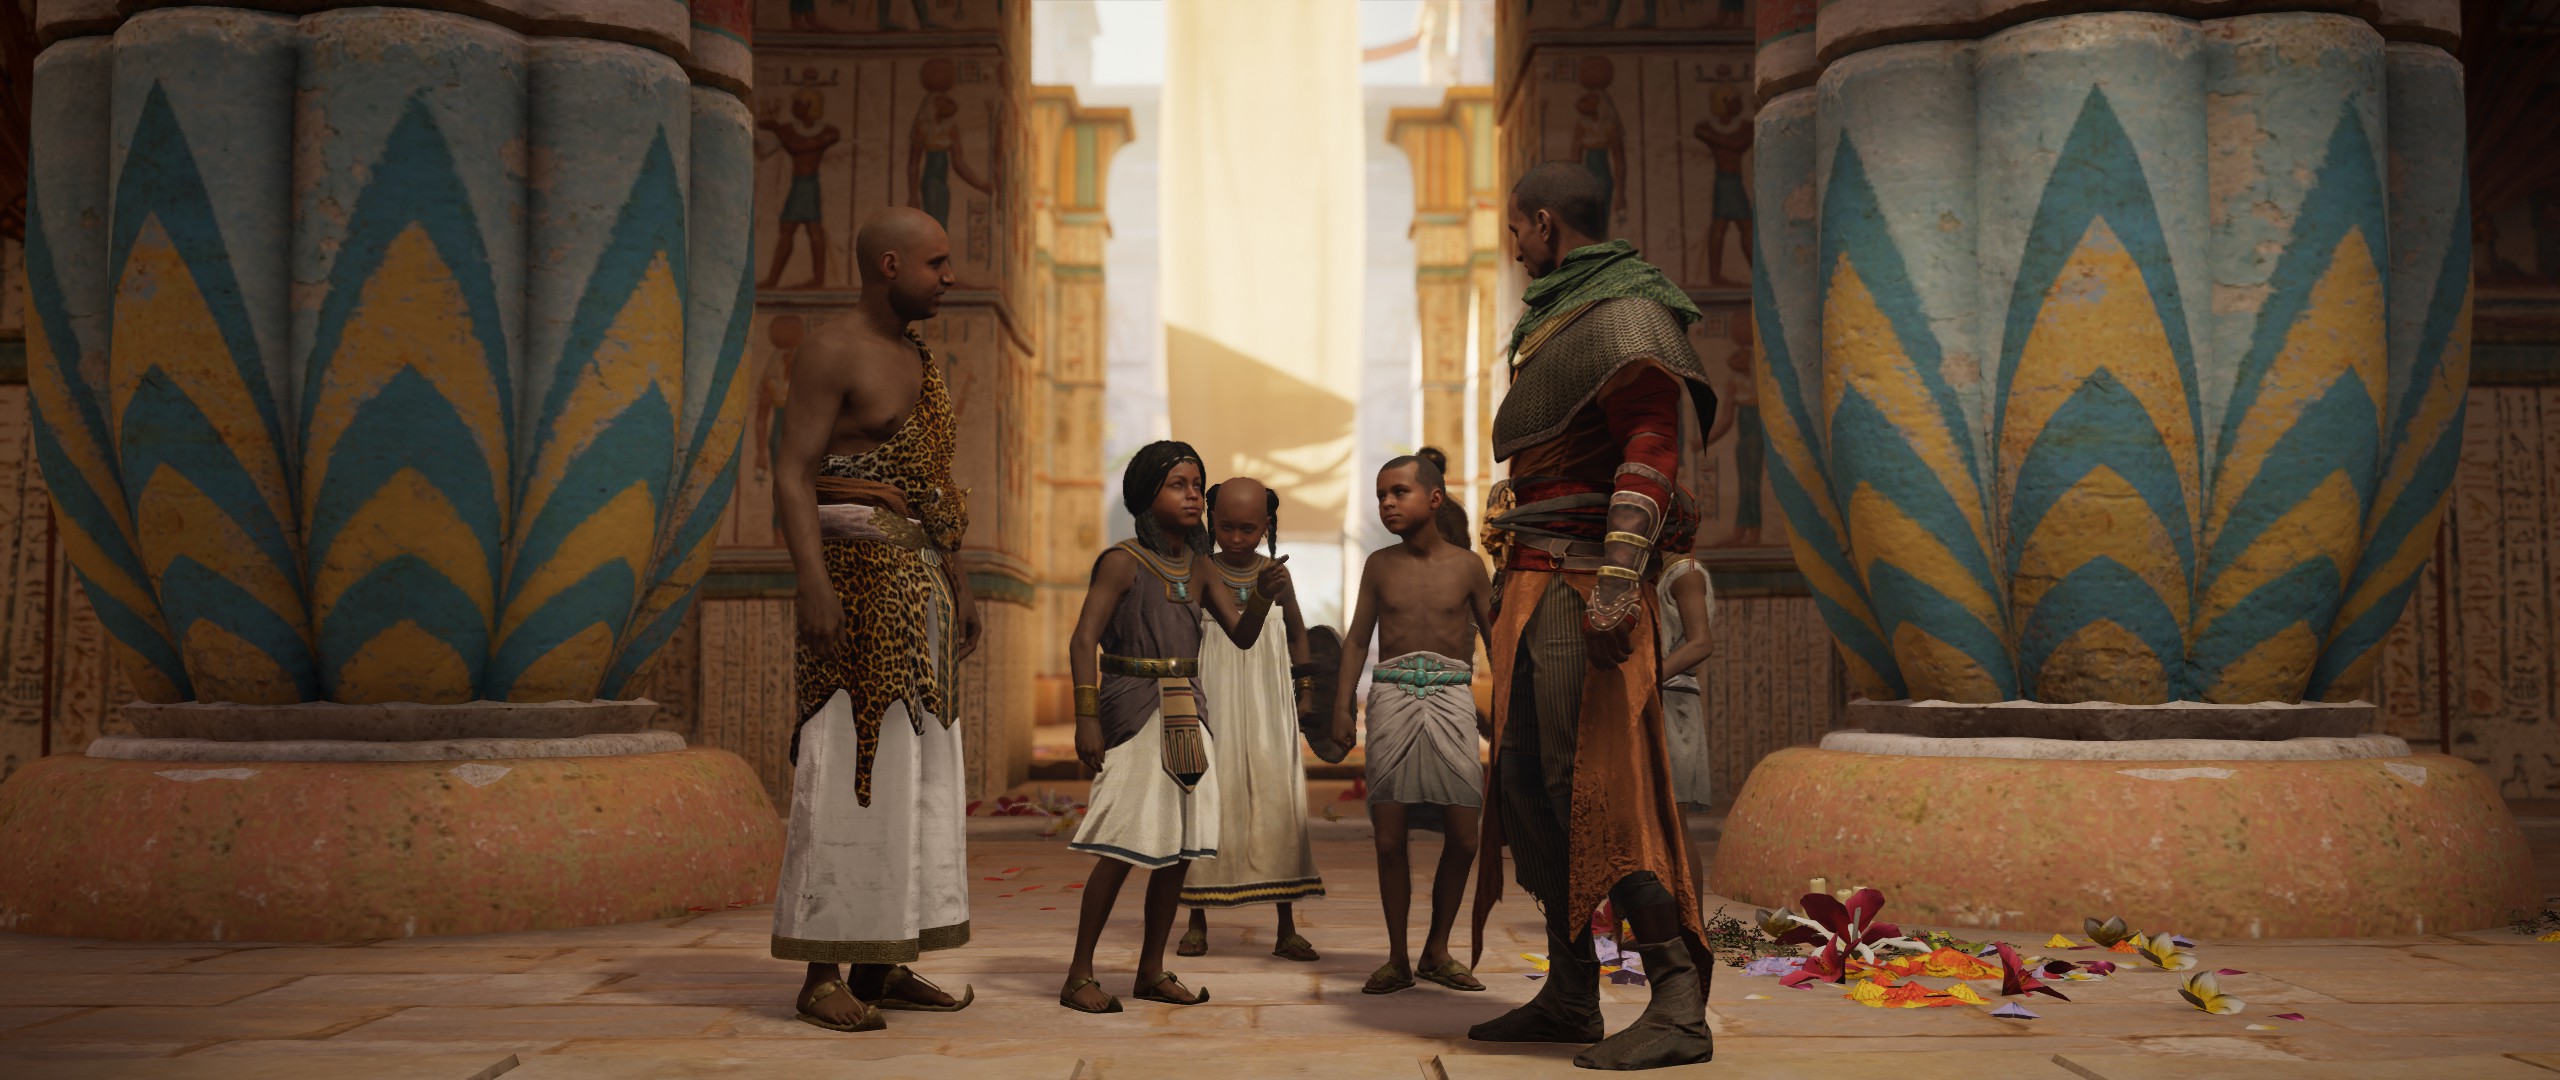 General 2560x1080 video games Origins Assassin's Creed Assassin's Creed: Origins Bayek Ubisoft video game characters